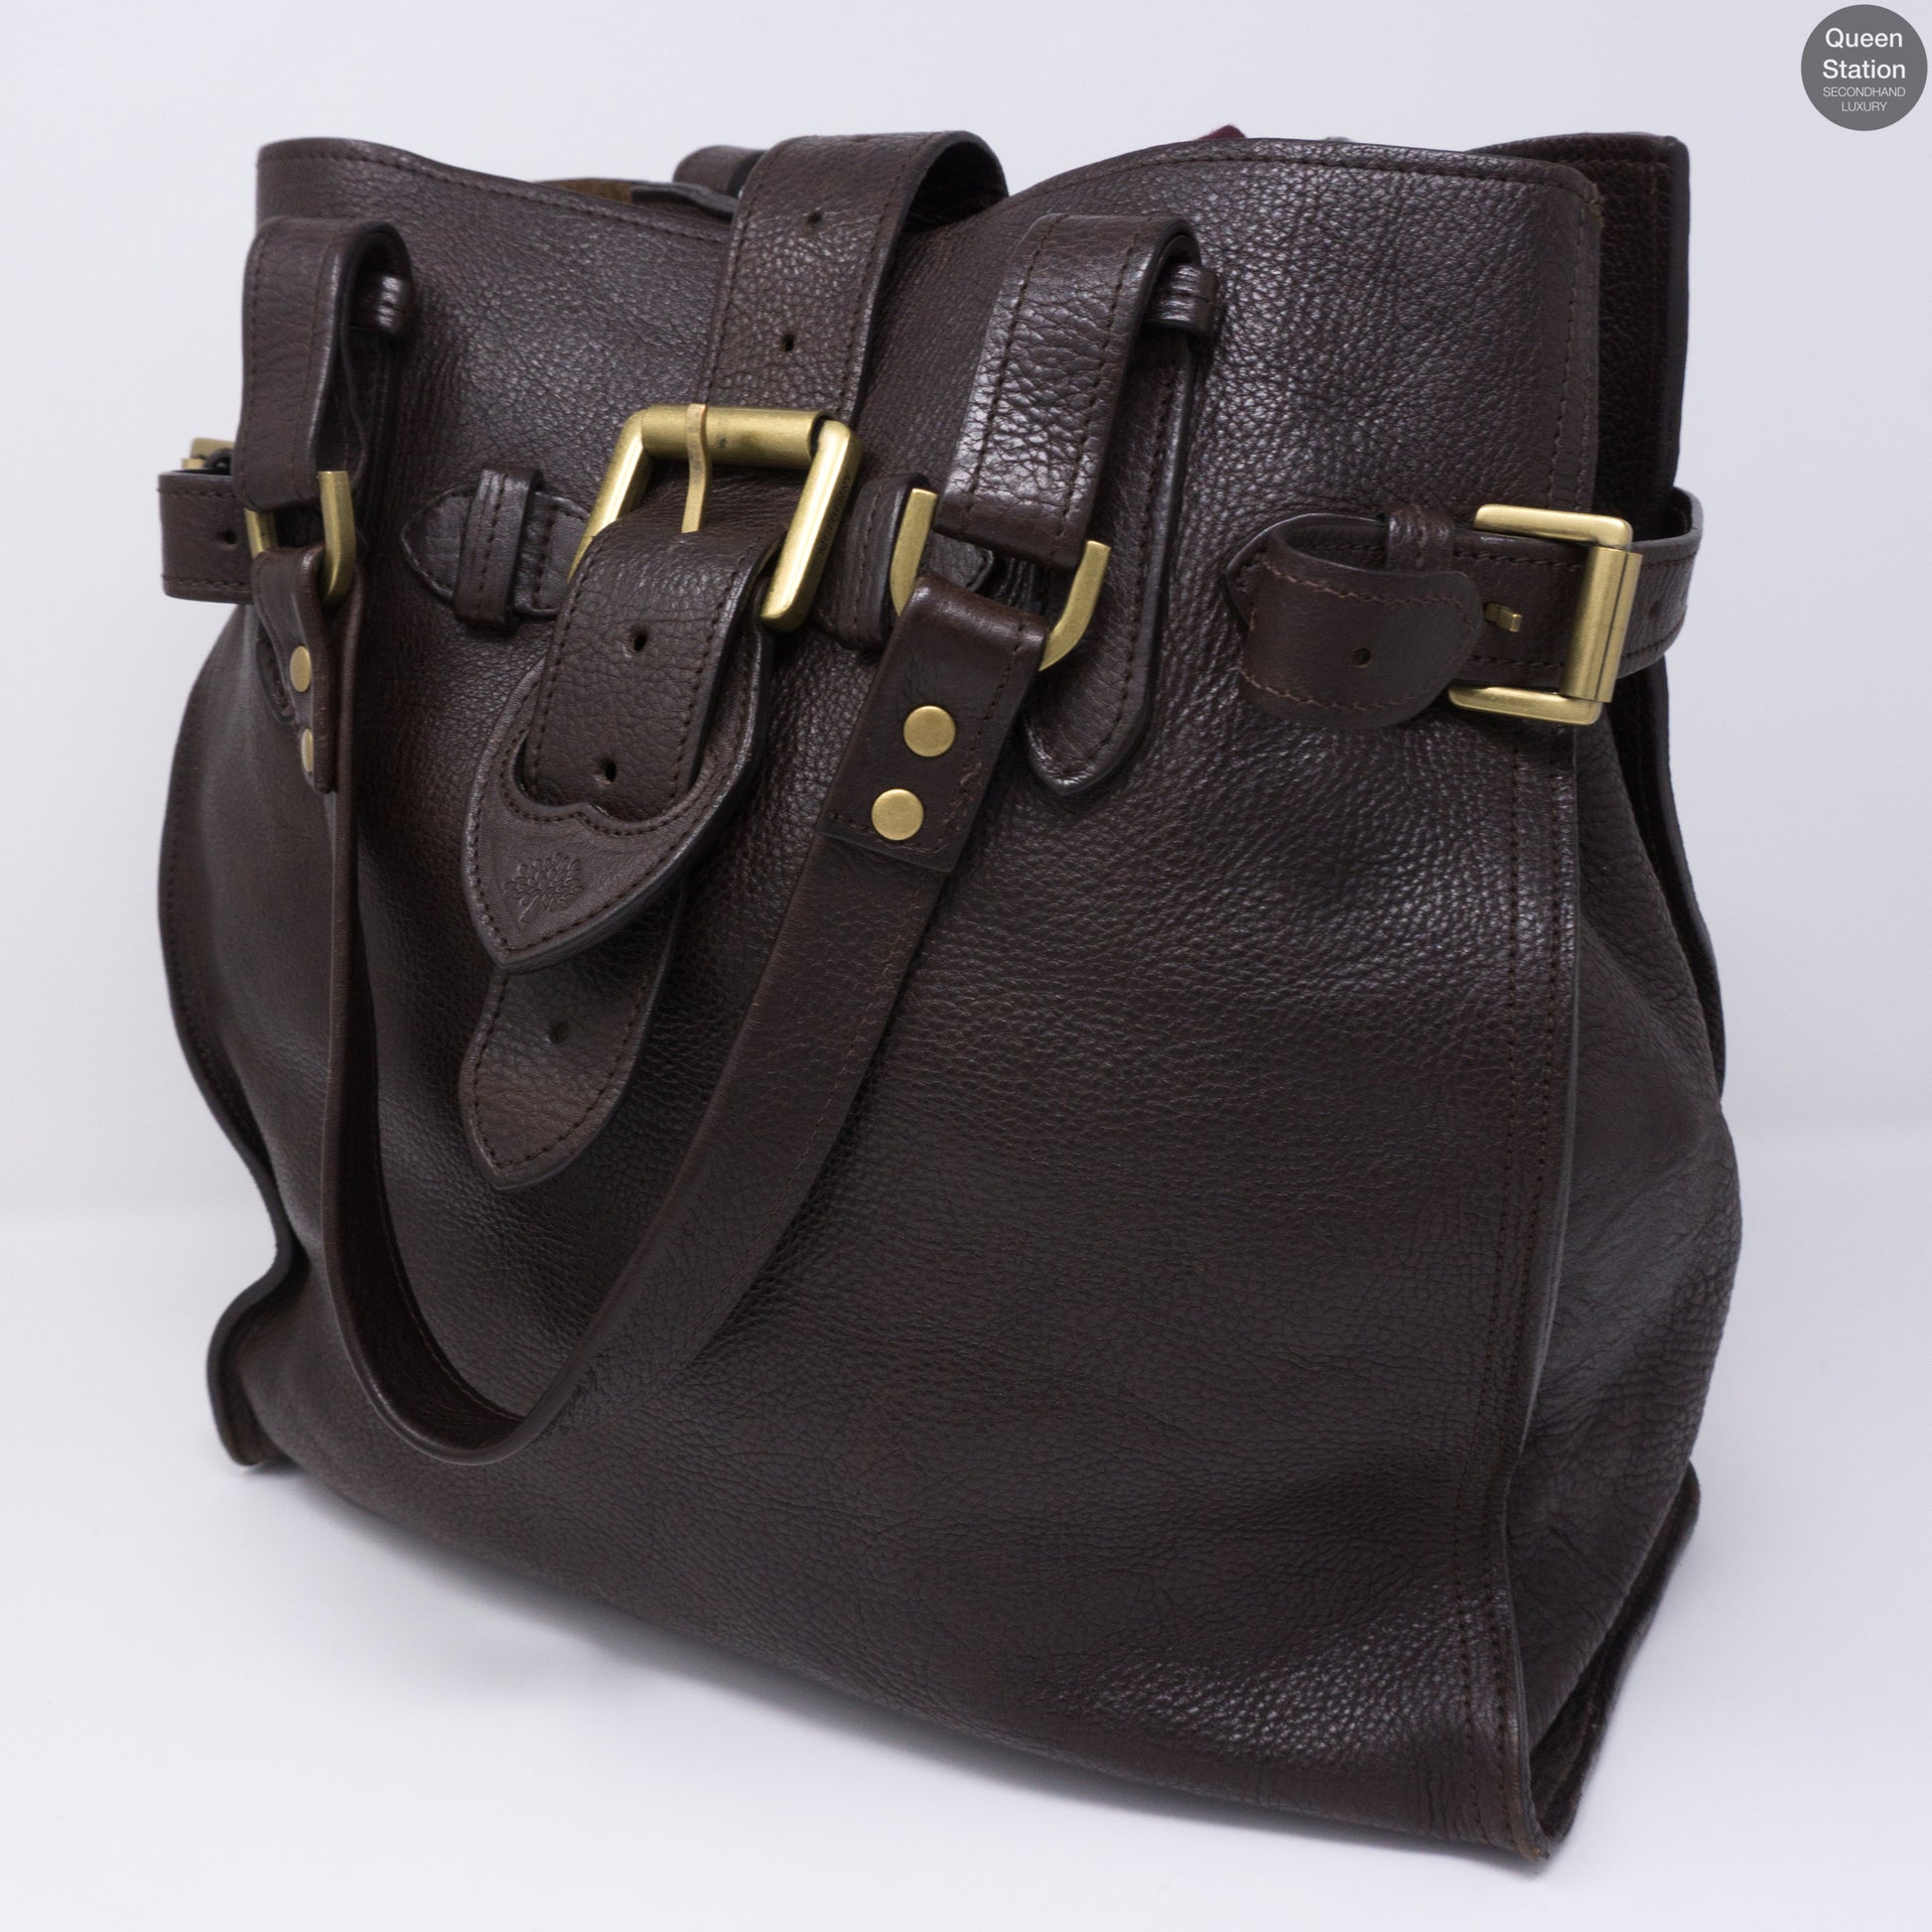 Mulberry Elgin Review 